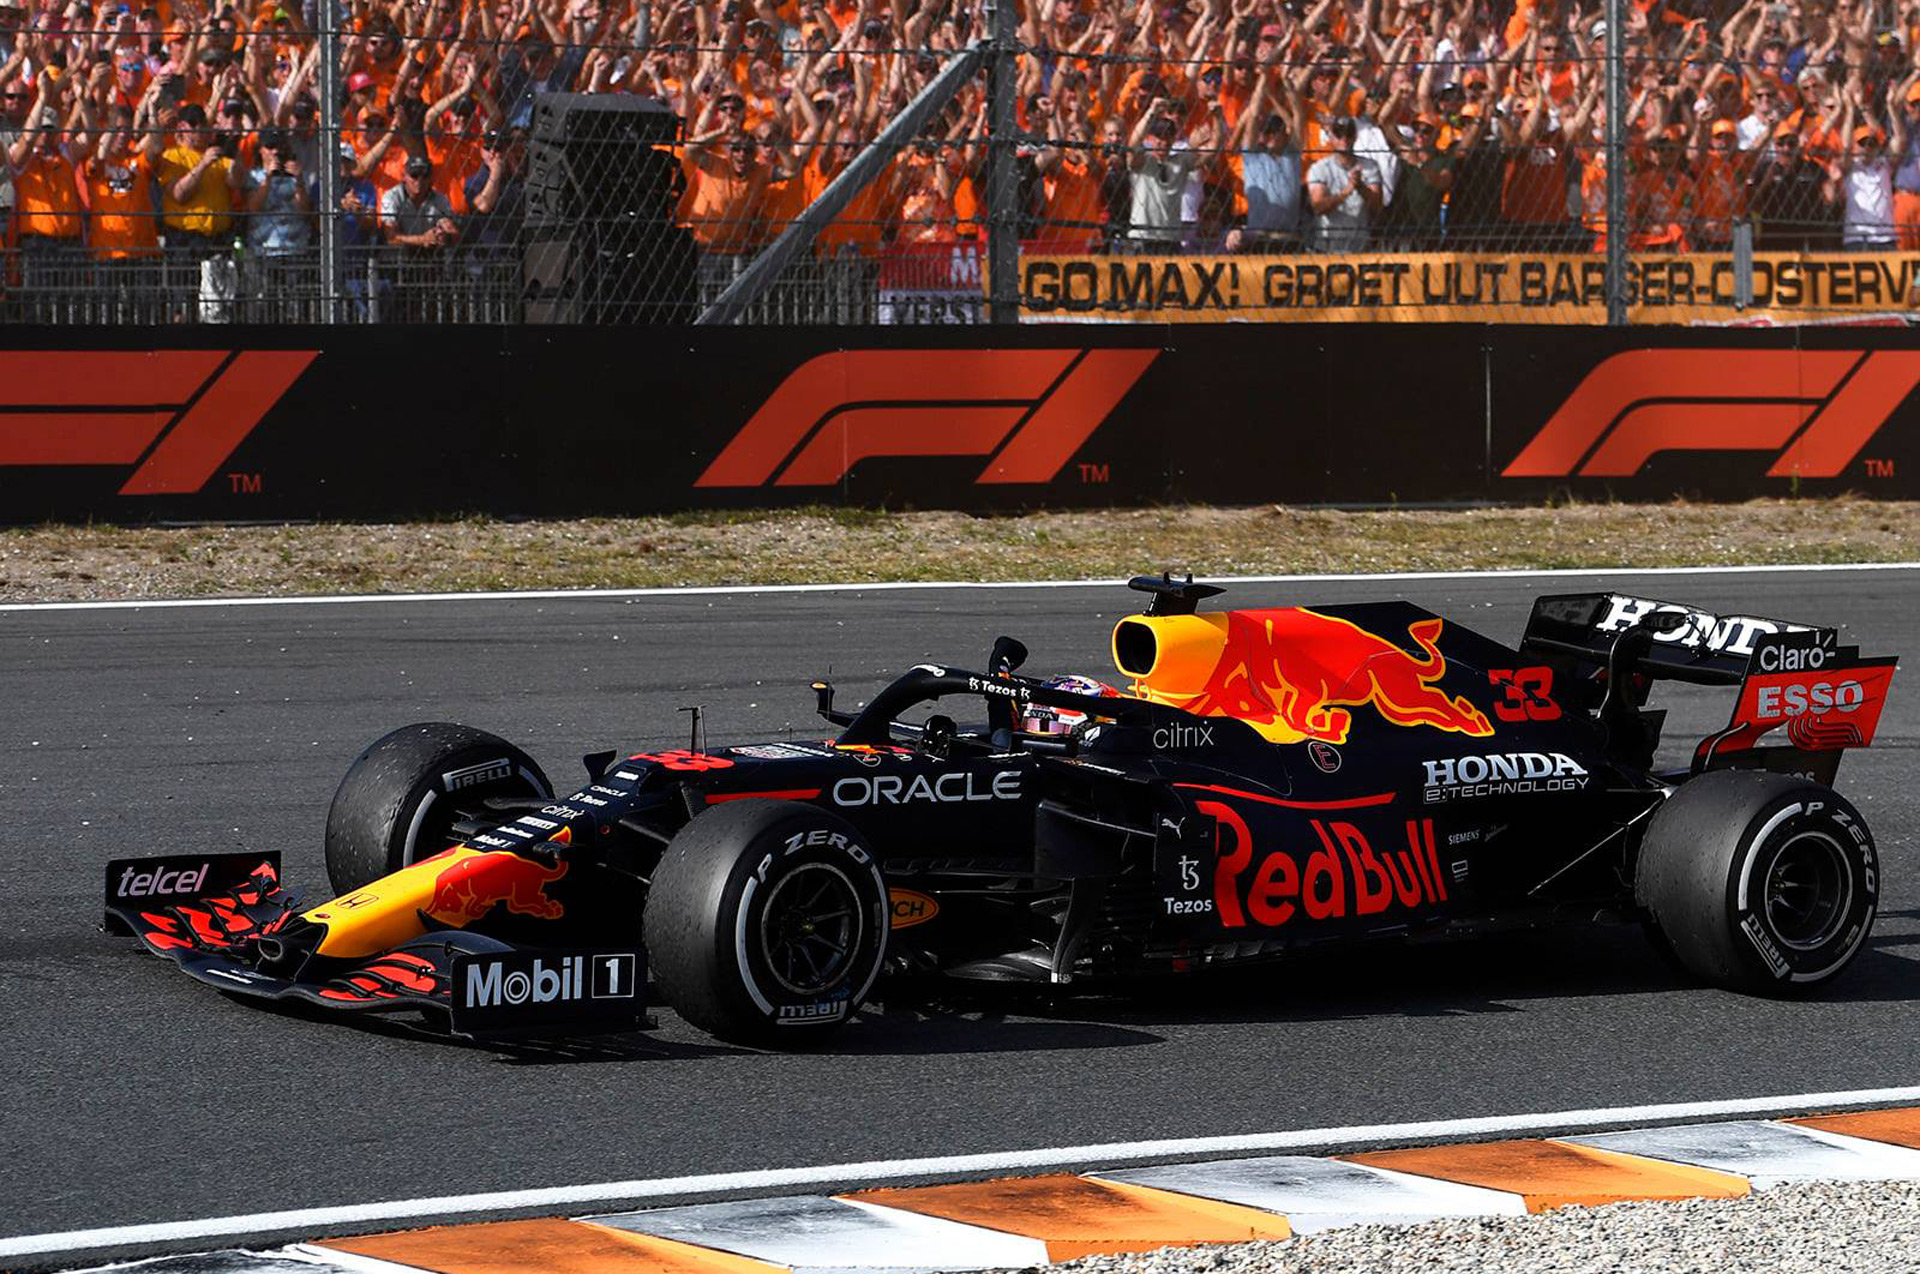 Verstappen storms to victory at 2021 Formula One Dutch Grand Prix